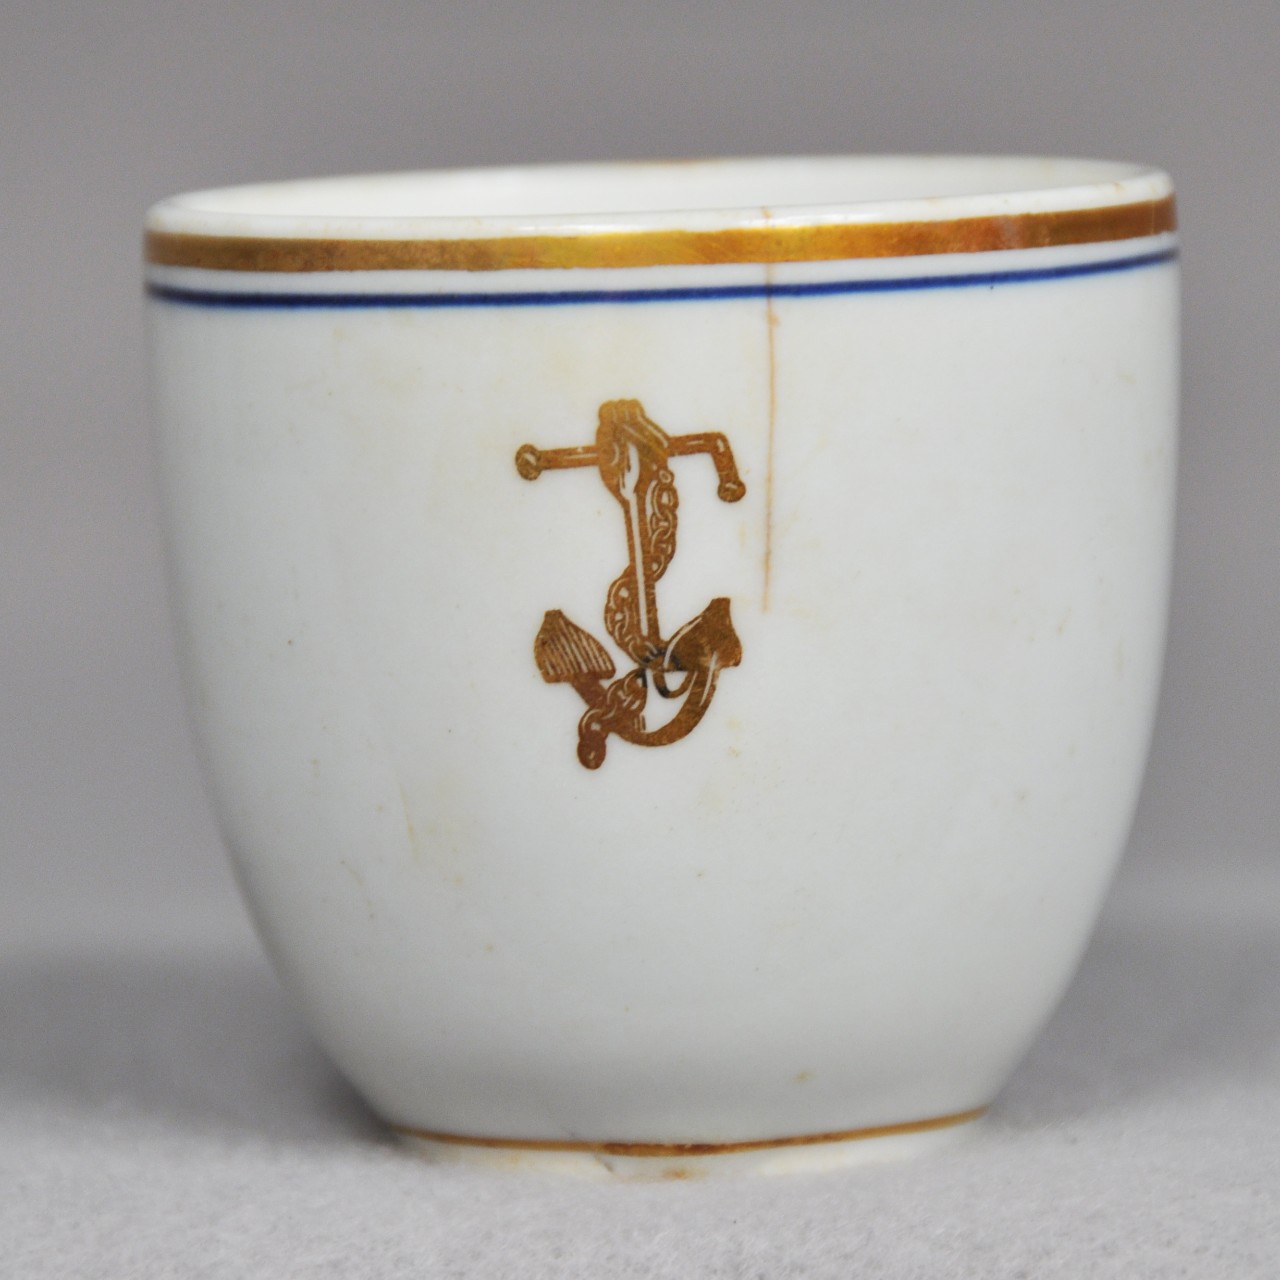 <p>A small ceramic coffee cup. There is a golden ring and a blue ring around the rim of the cup. There is a golden anchor with a chain wrapped around it on the exterior of the cup.</p>
